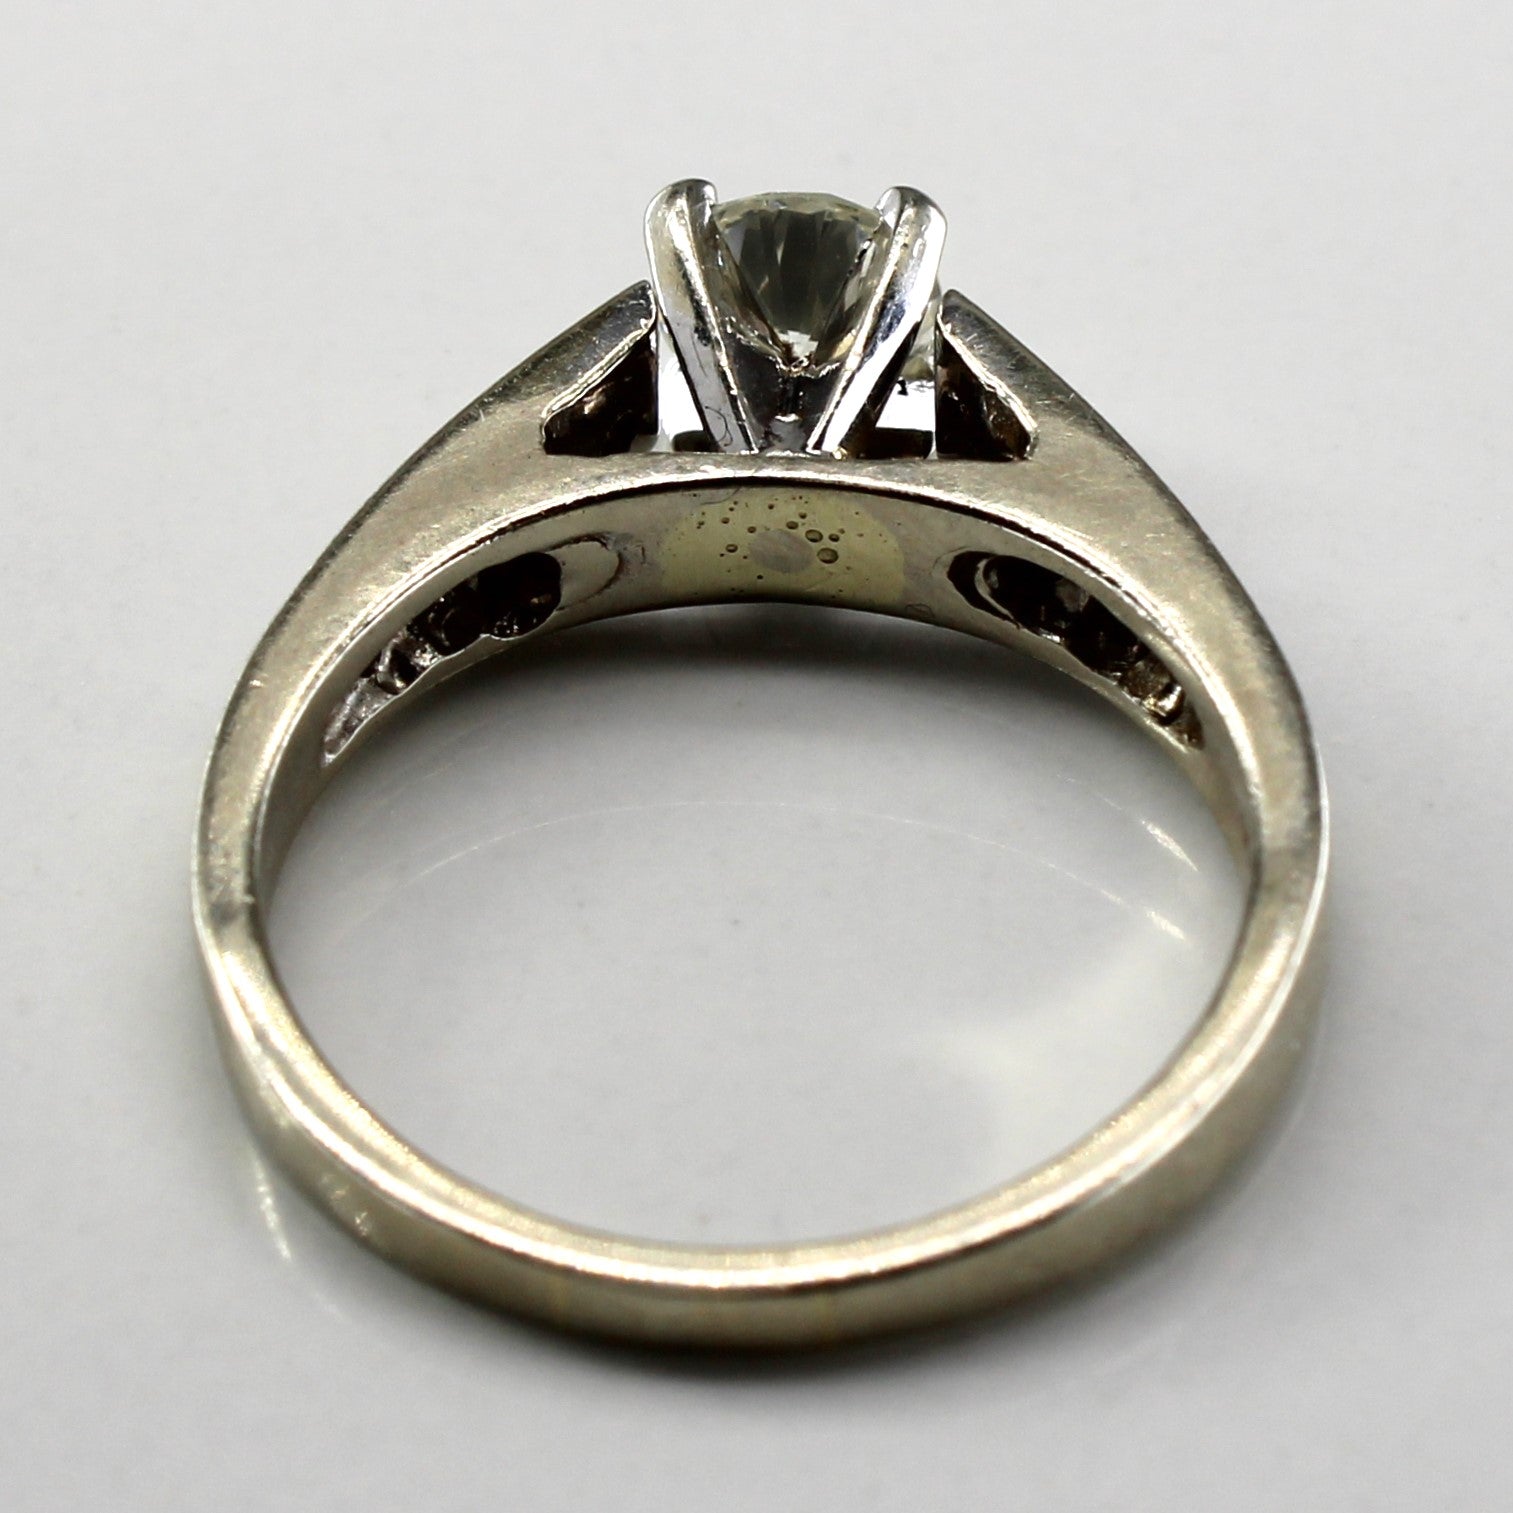 Solitaire with Accents Diamond Ring | 0.82ctw | SZ 7.25 |